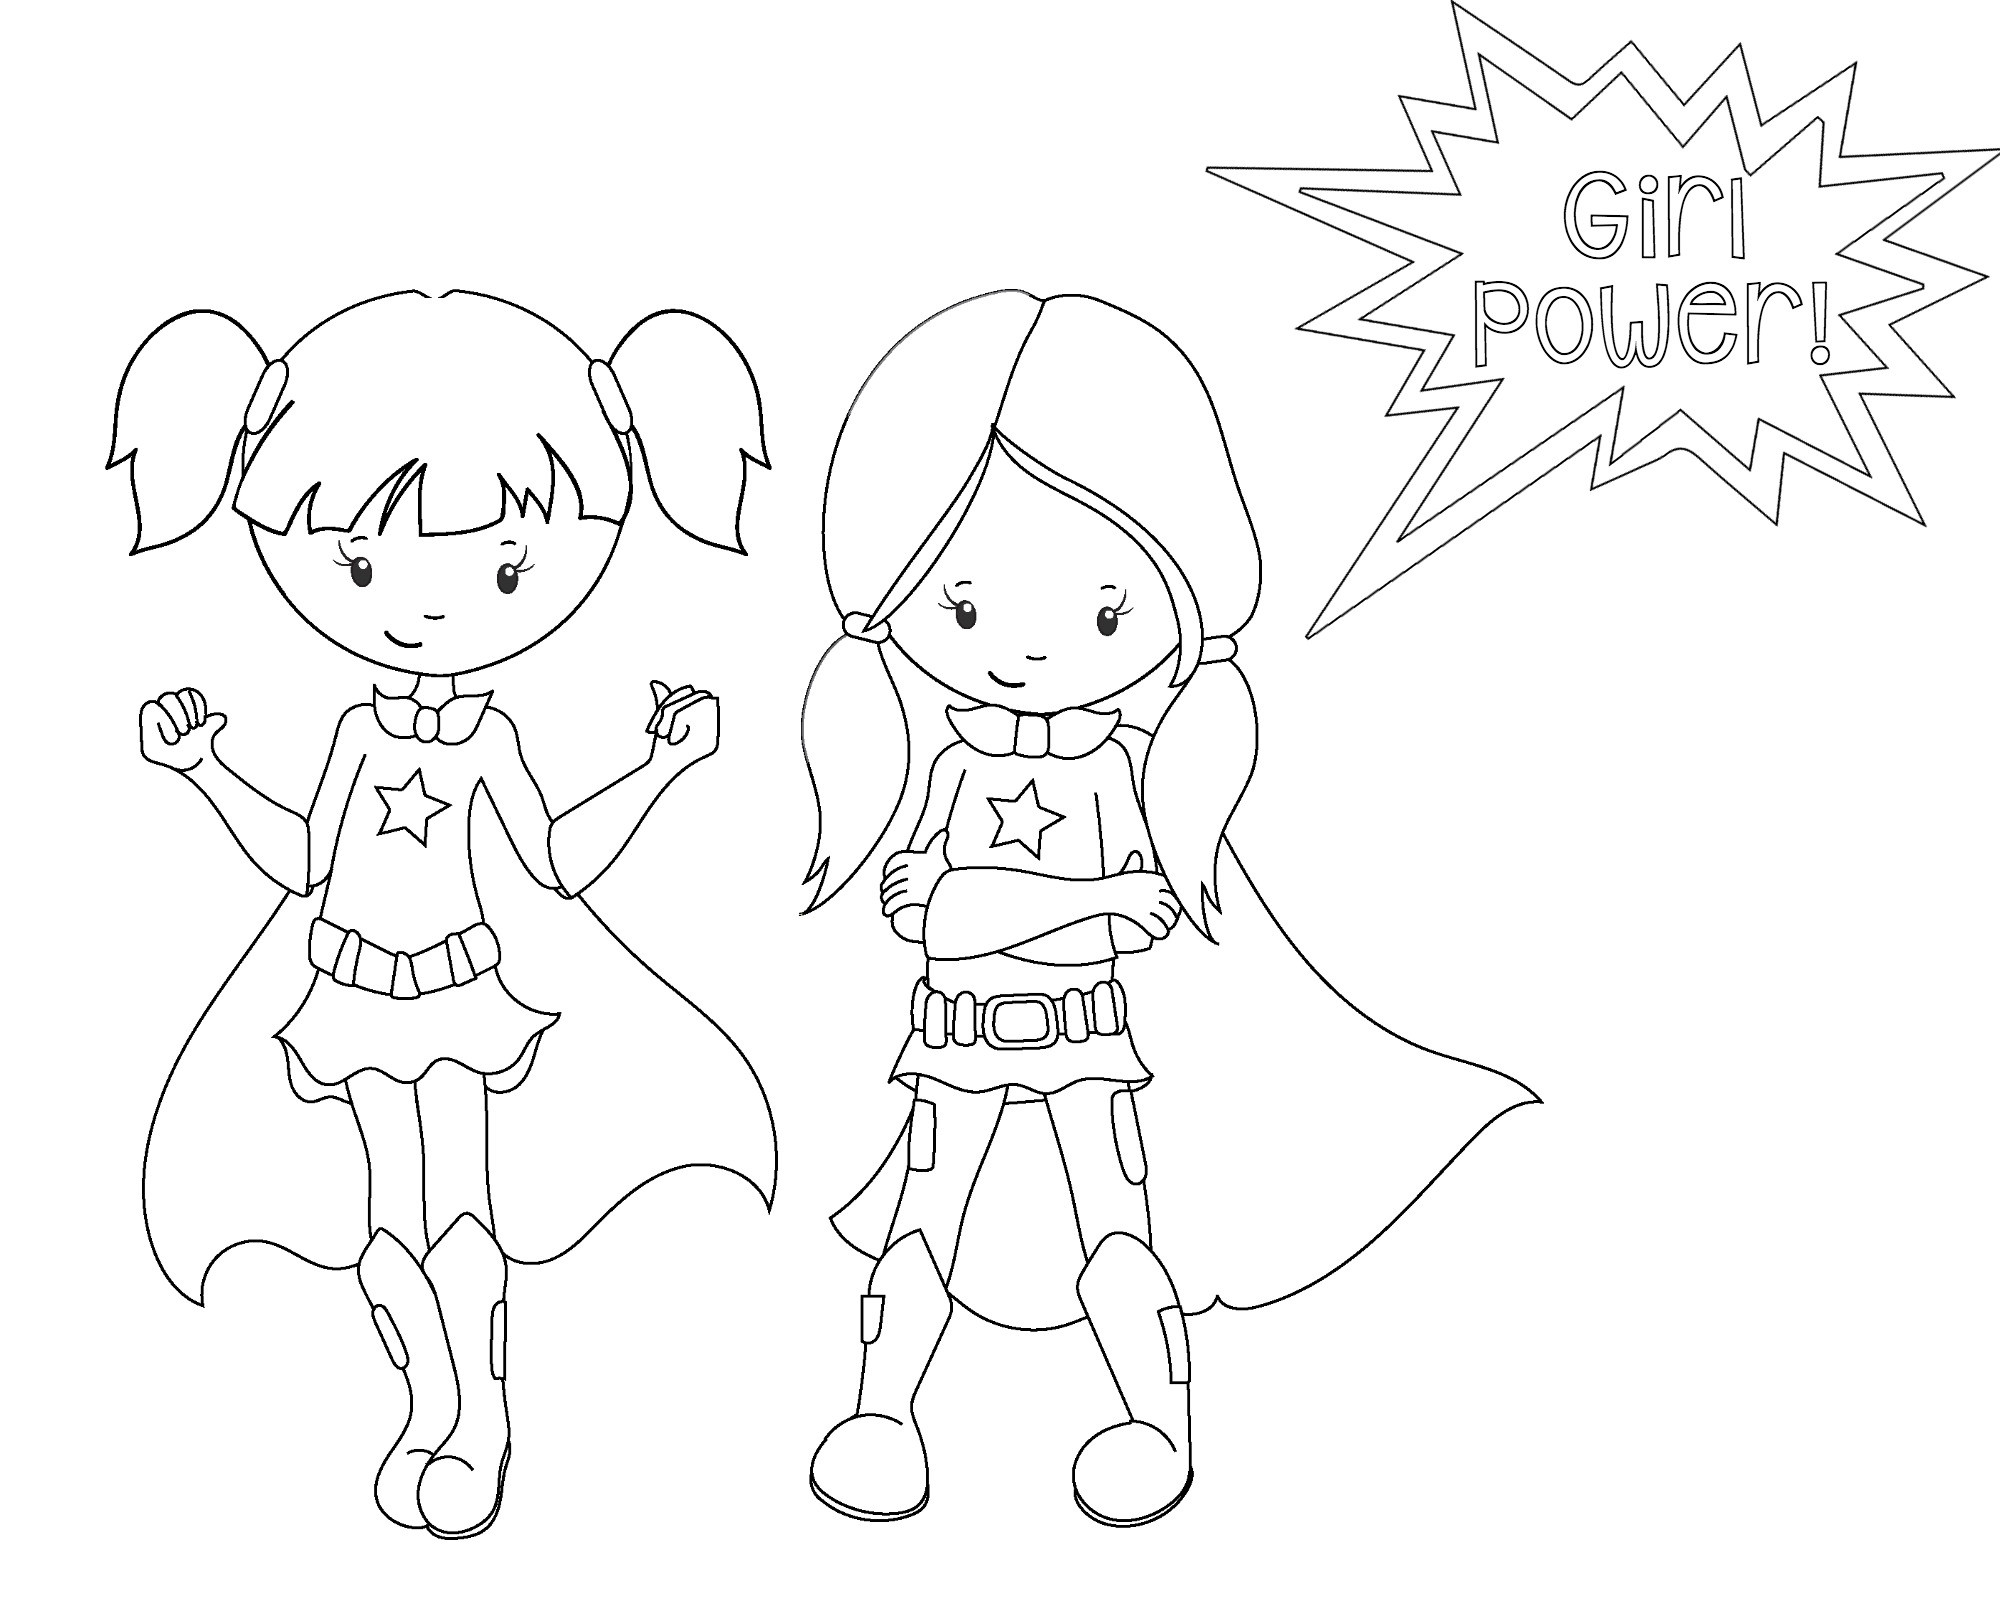 Super Hero Coloring Pages For Kids
 Superhero Coloring Pages Crazy Little Projects